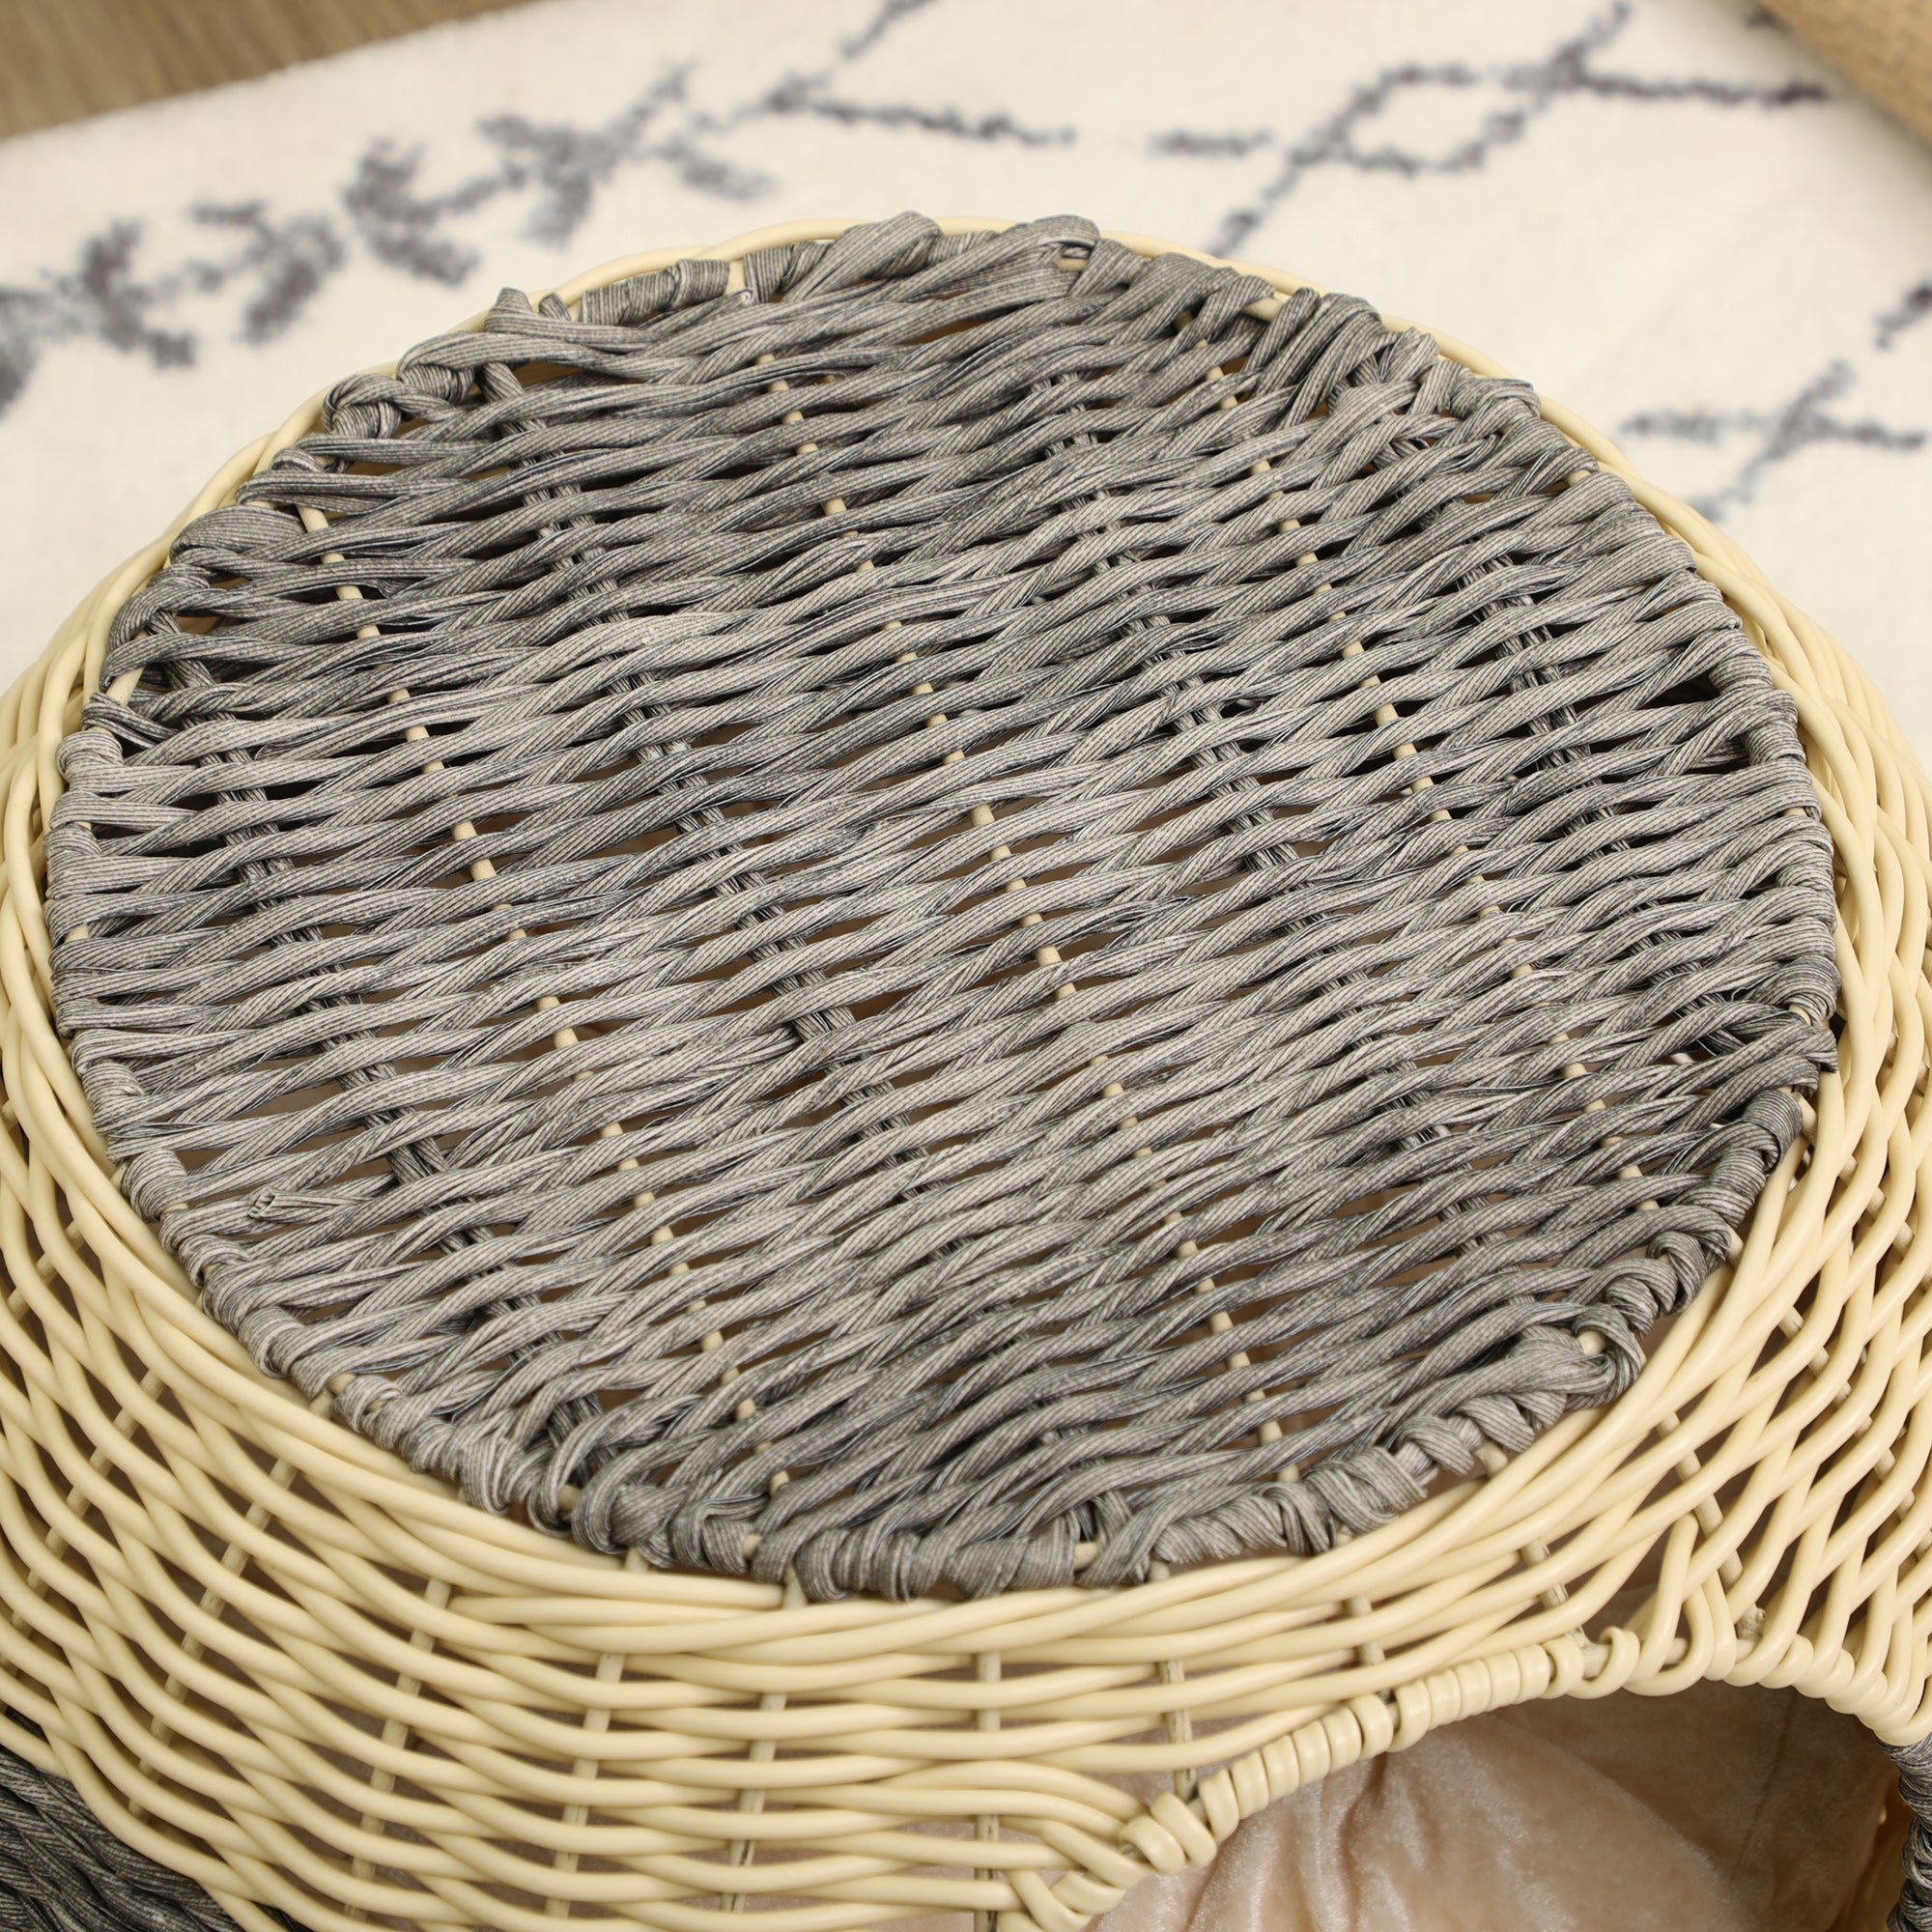 PawHut Wicker Cat Bed, Rattan Raised Cosy Kitten Cave, with Soft Washable Cushion, 妗?0 x 30cm